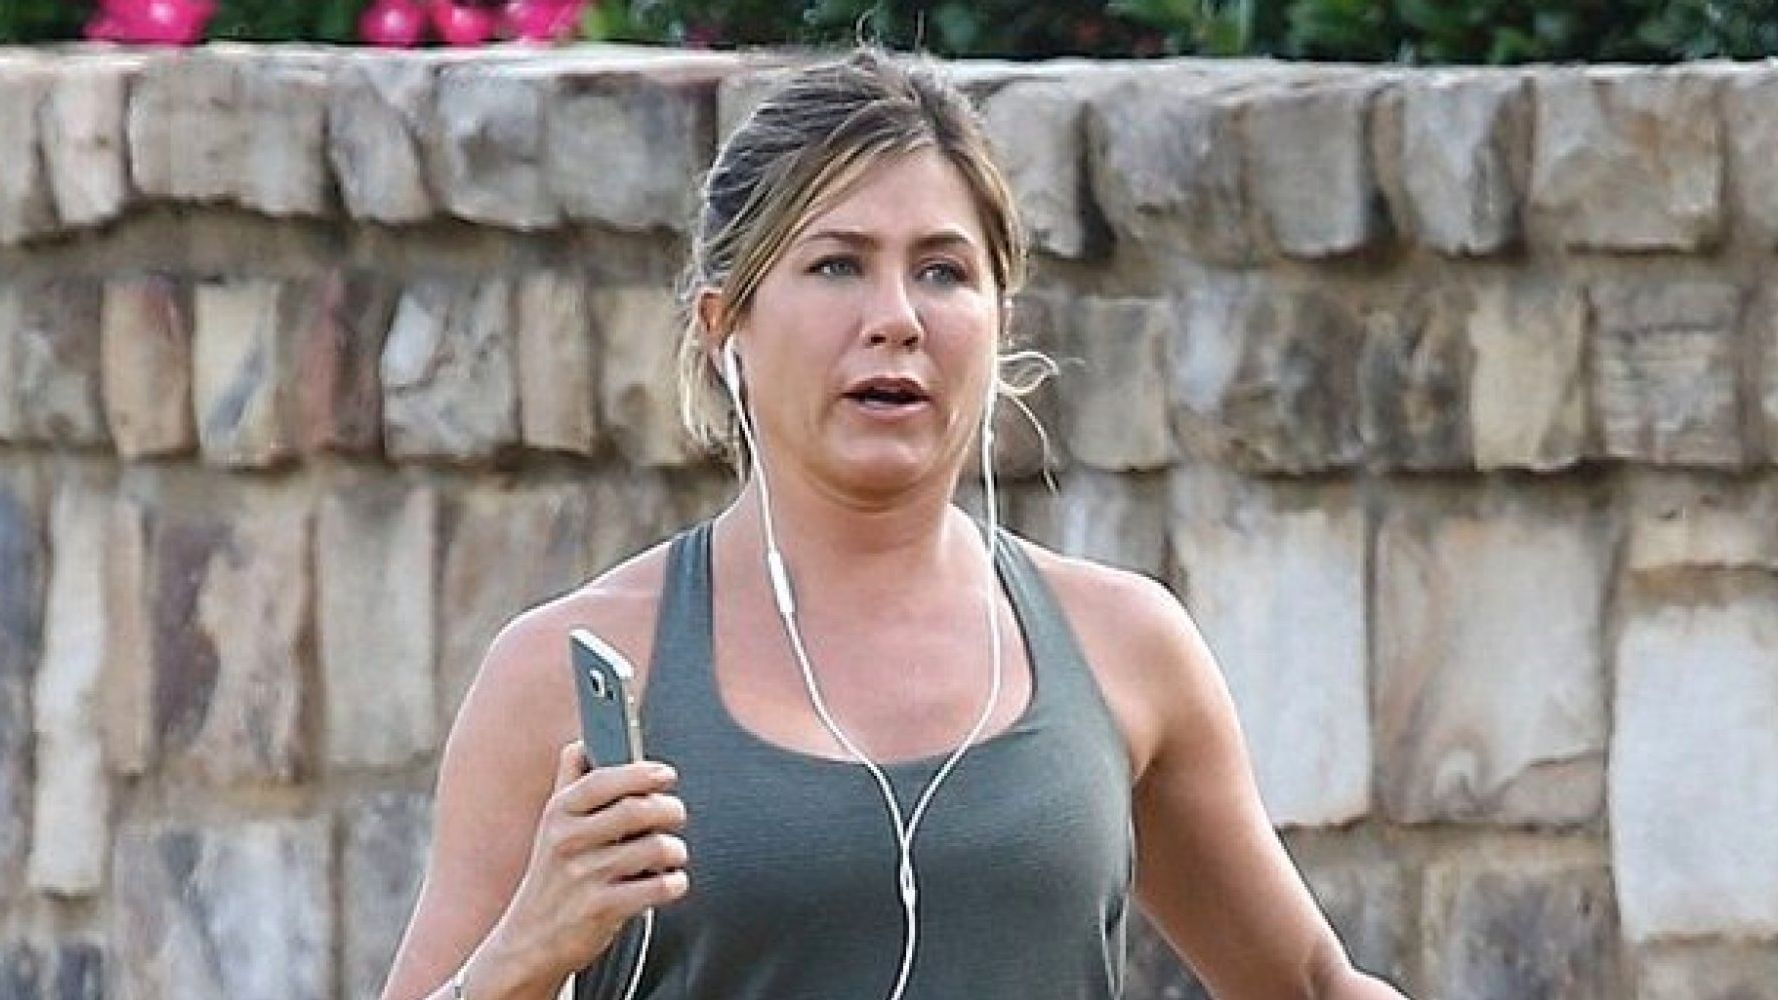 Daily Mail Branded Sickening After Asking Jennifer Aniston Did You